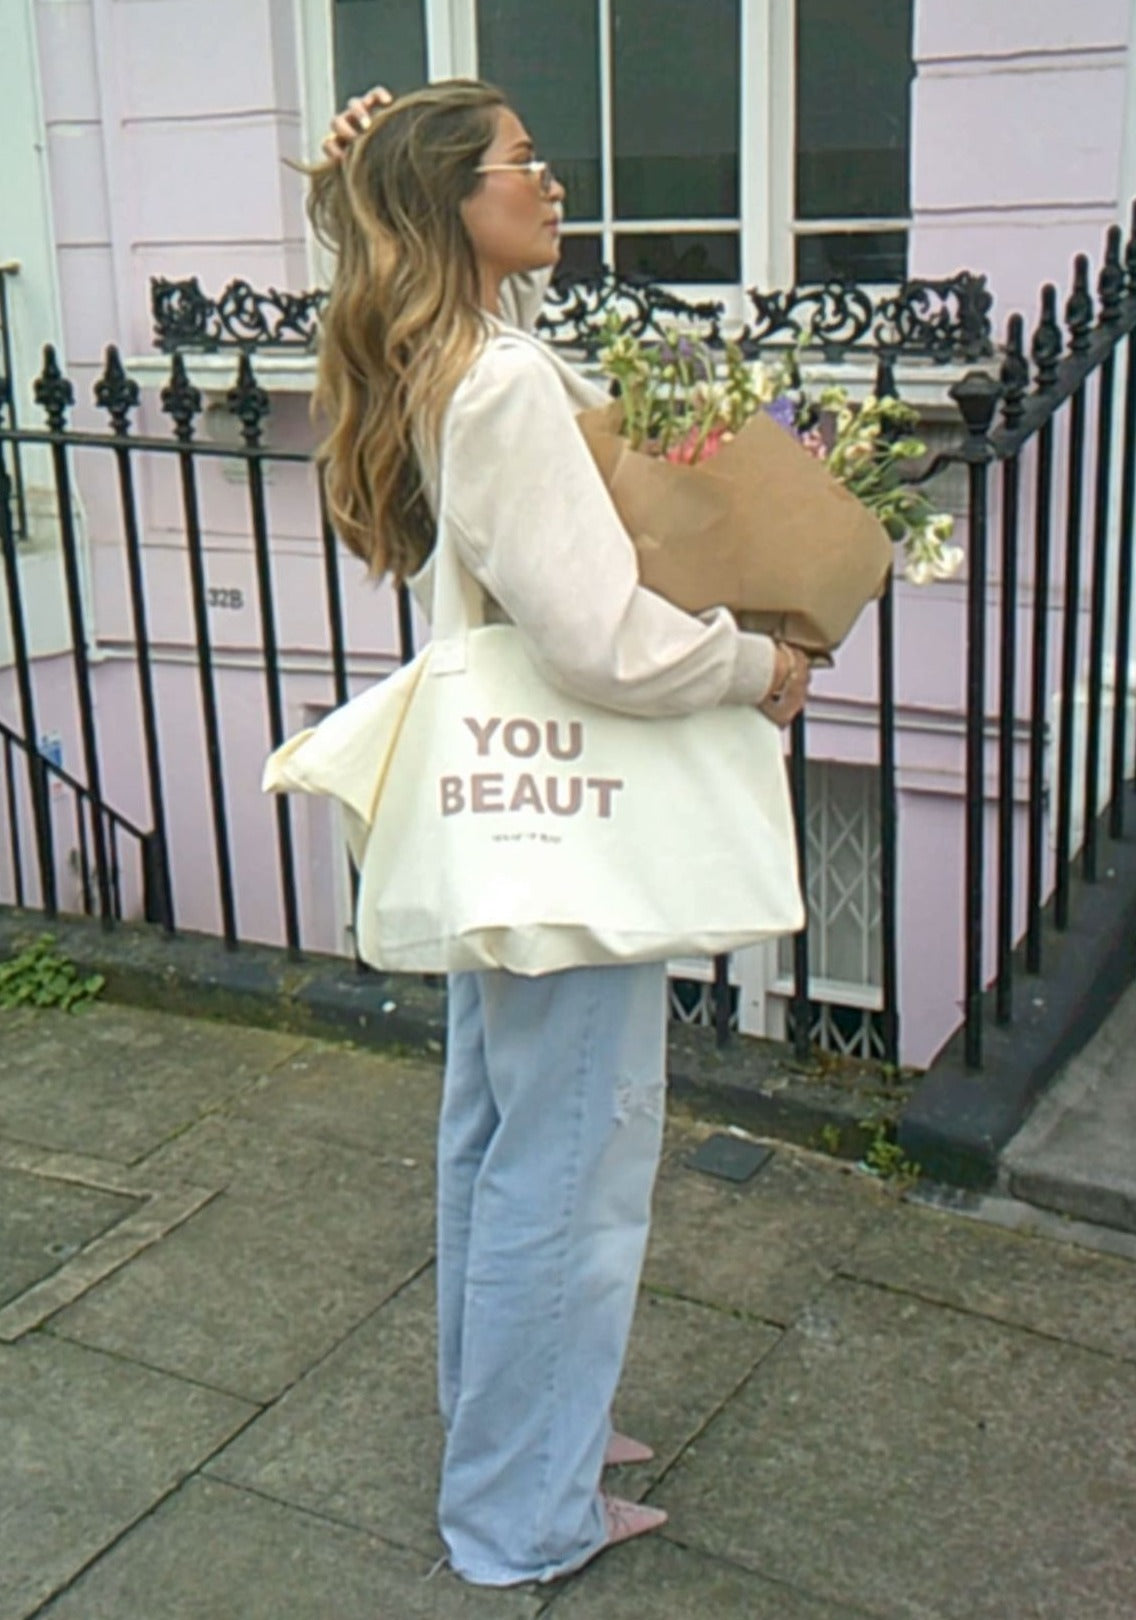 House of Beaut - You Beaut Tote Bag